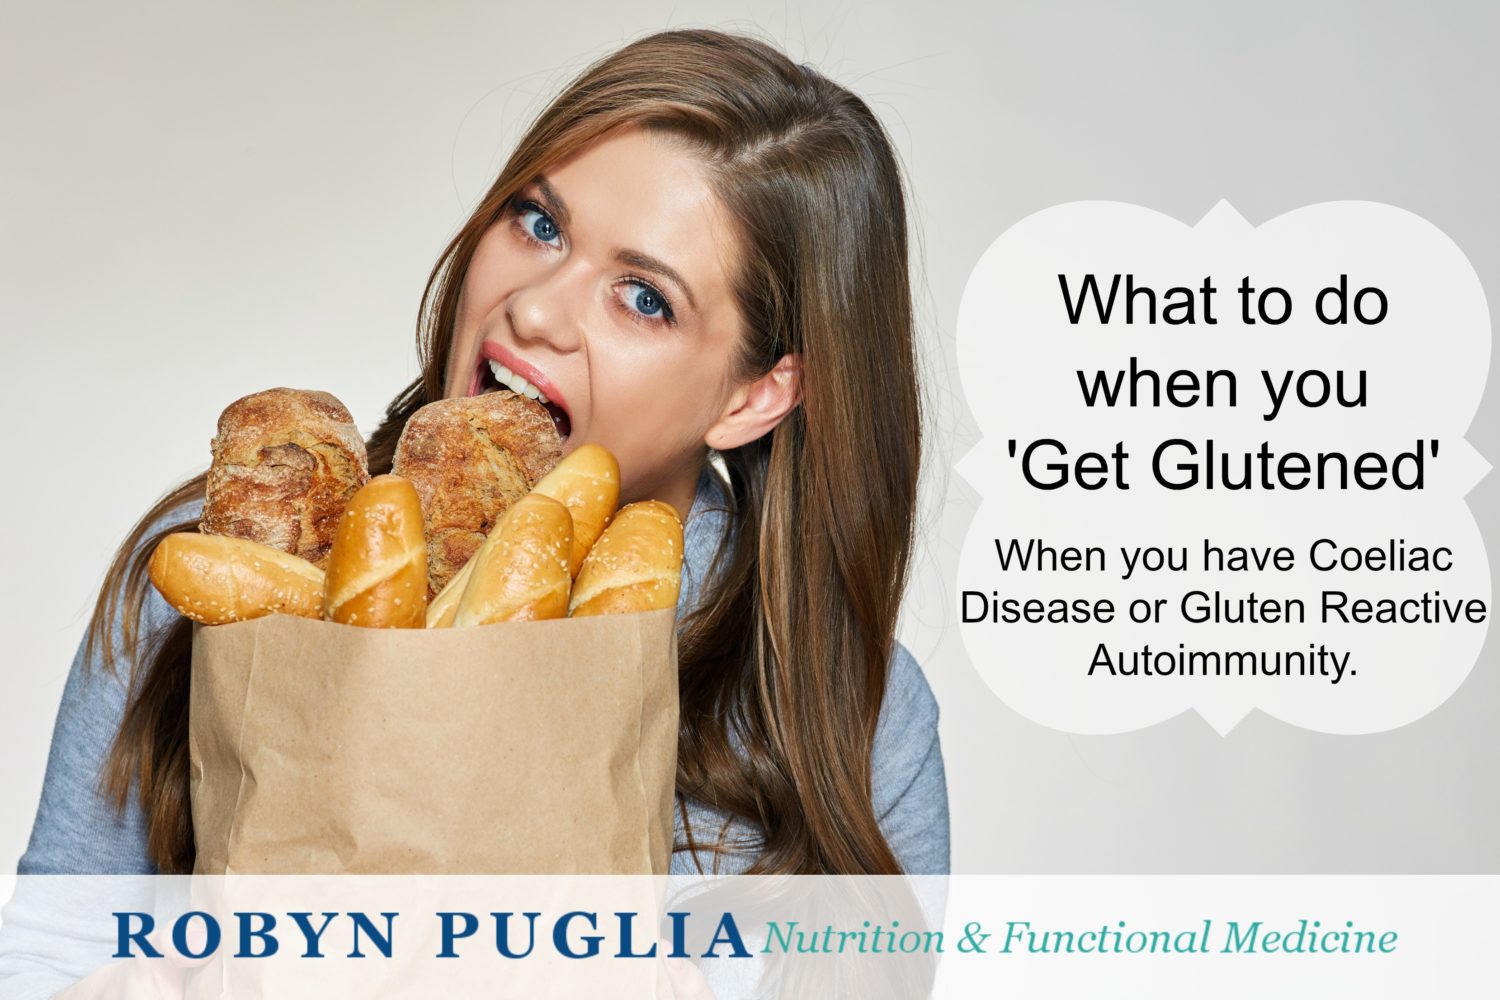 What to do when you Get Glutened